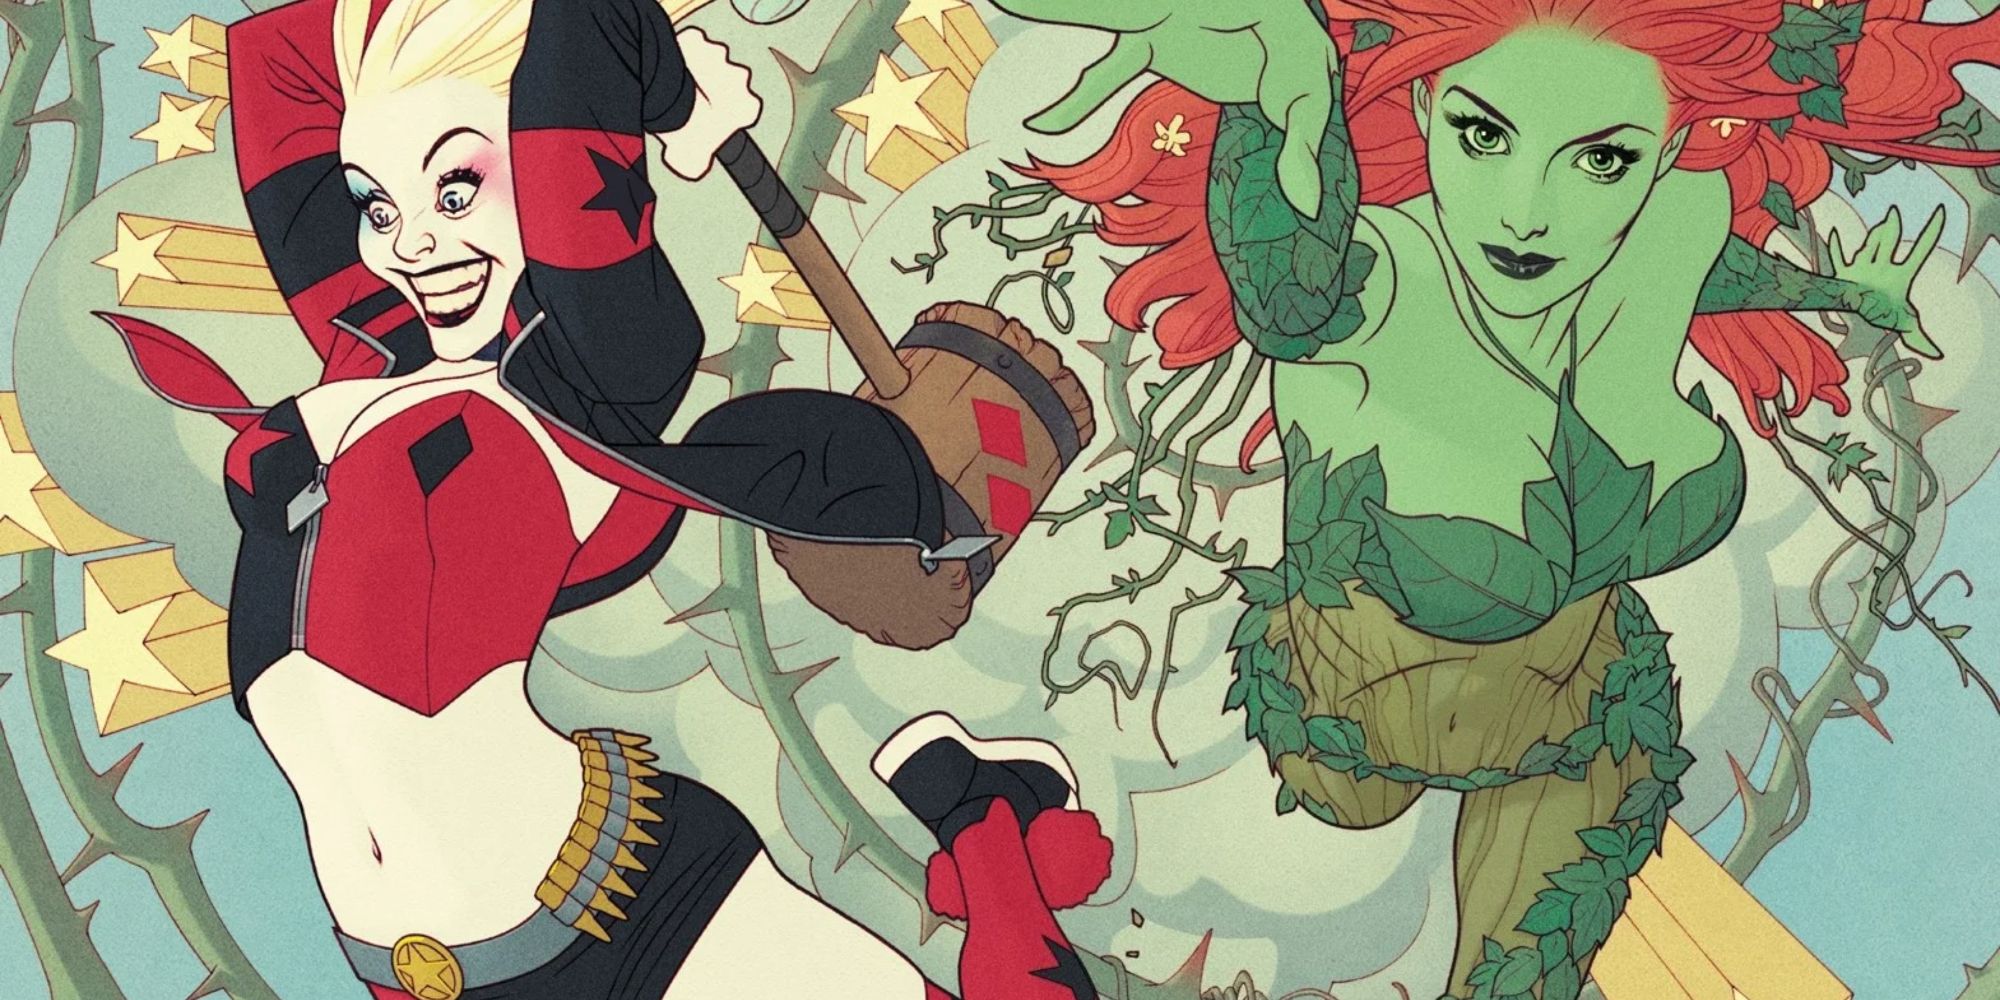 Harley Quinn and Poison Ivy leap into battle in DC Comics.